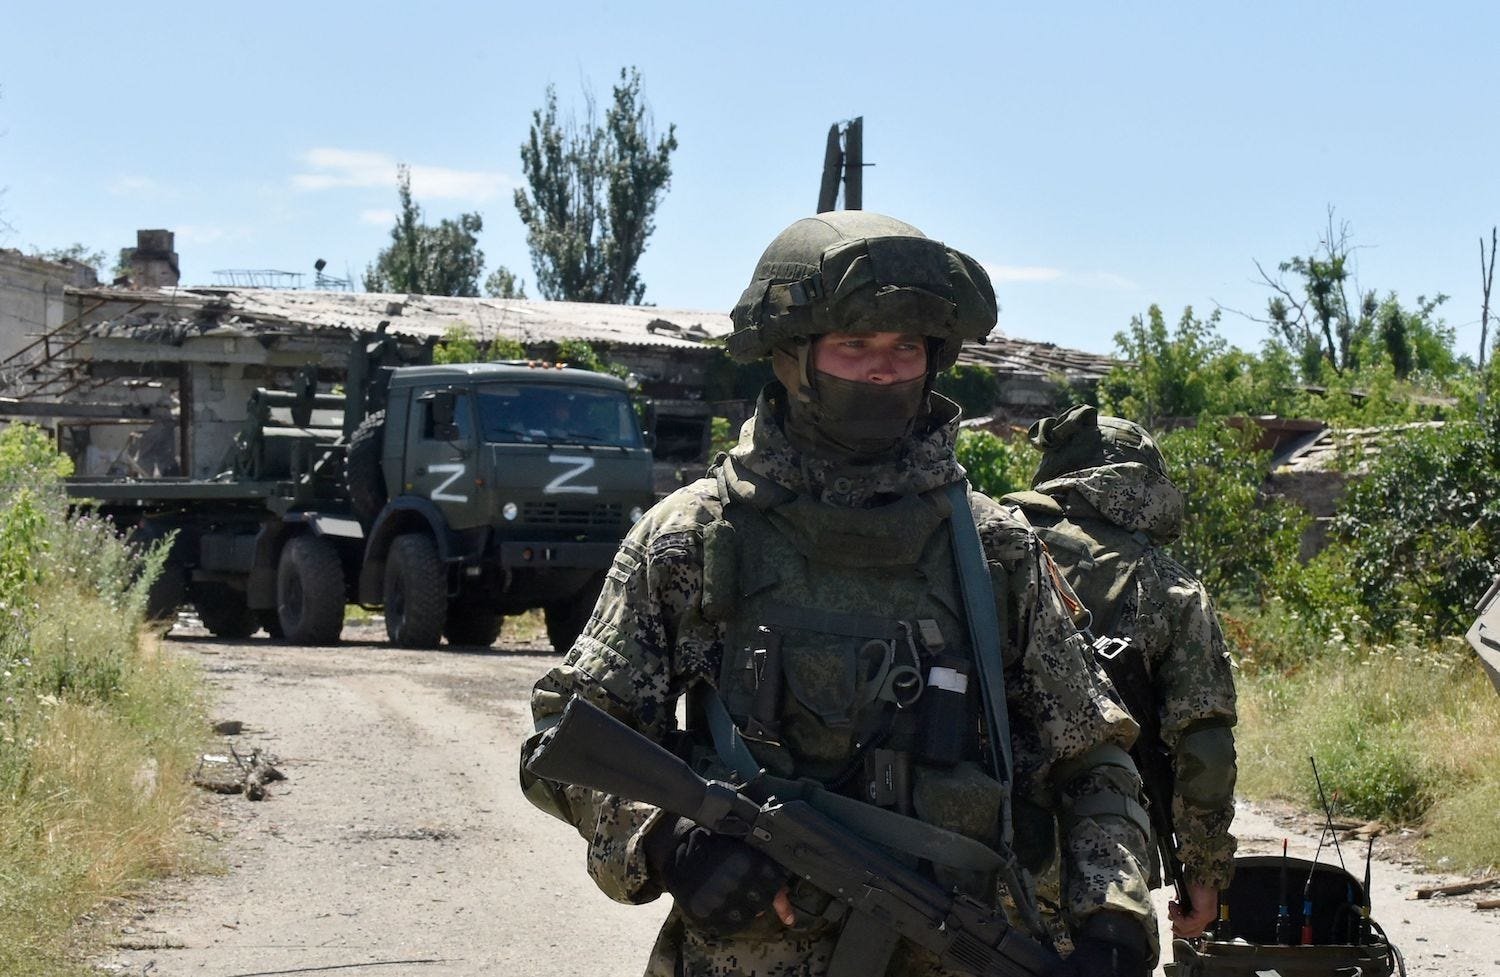 News24.com | Russia claims troops have secured more parts in eastern Ukraine